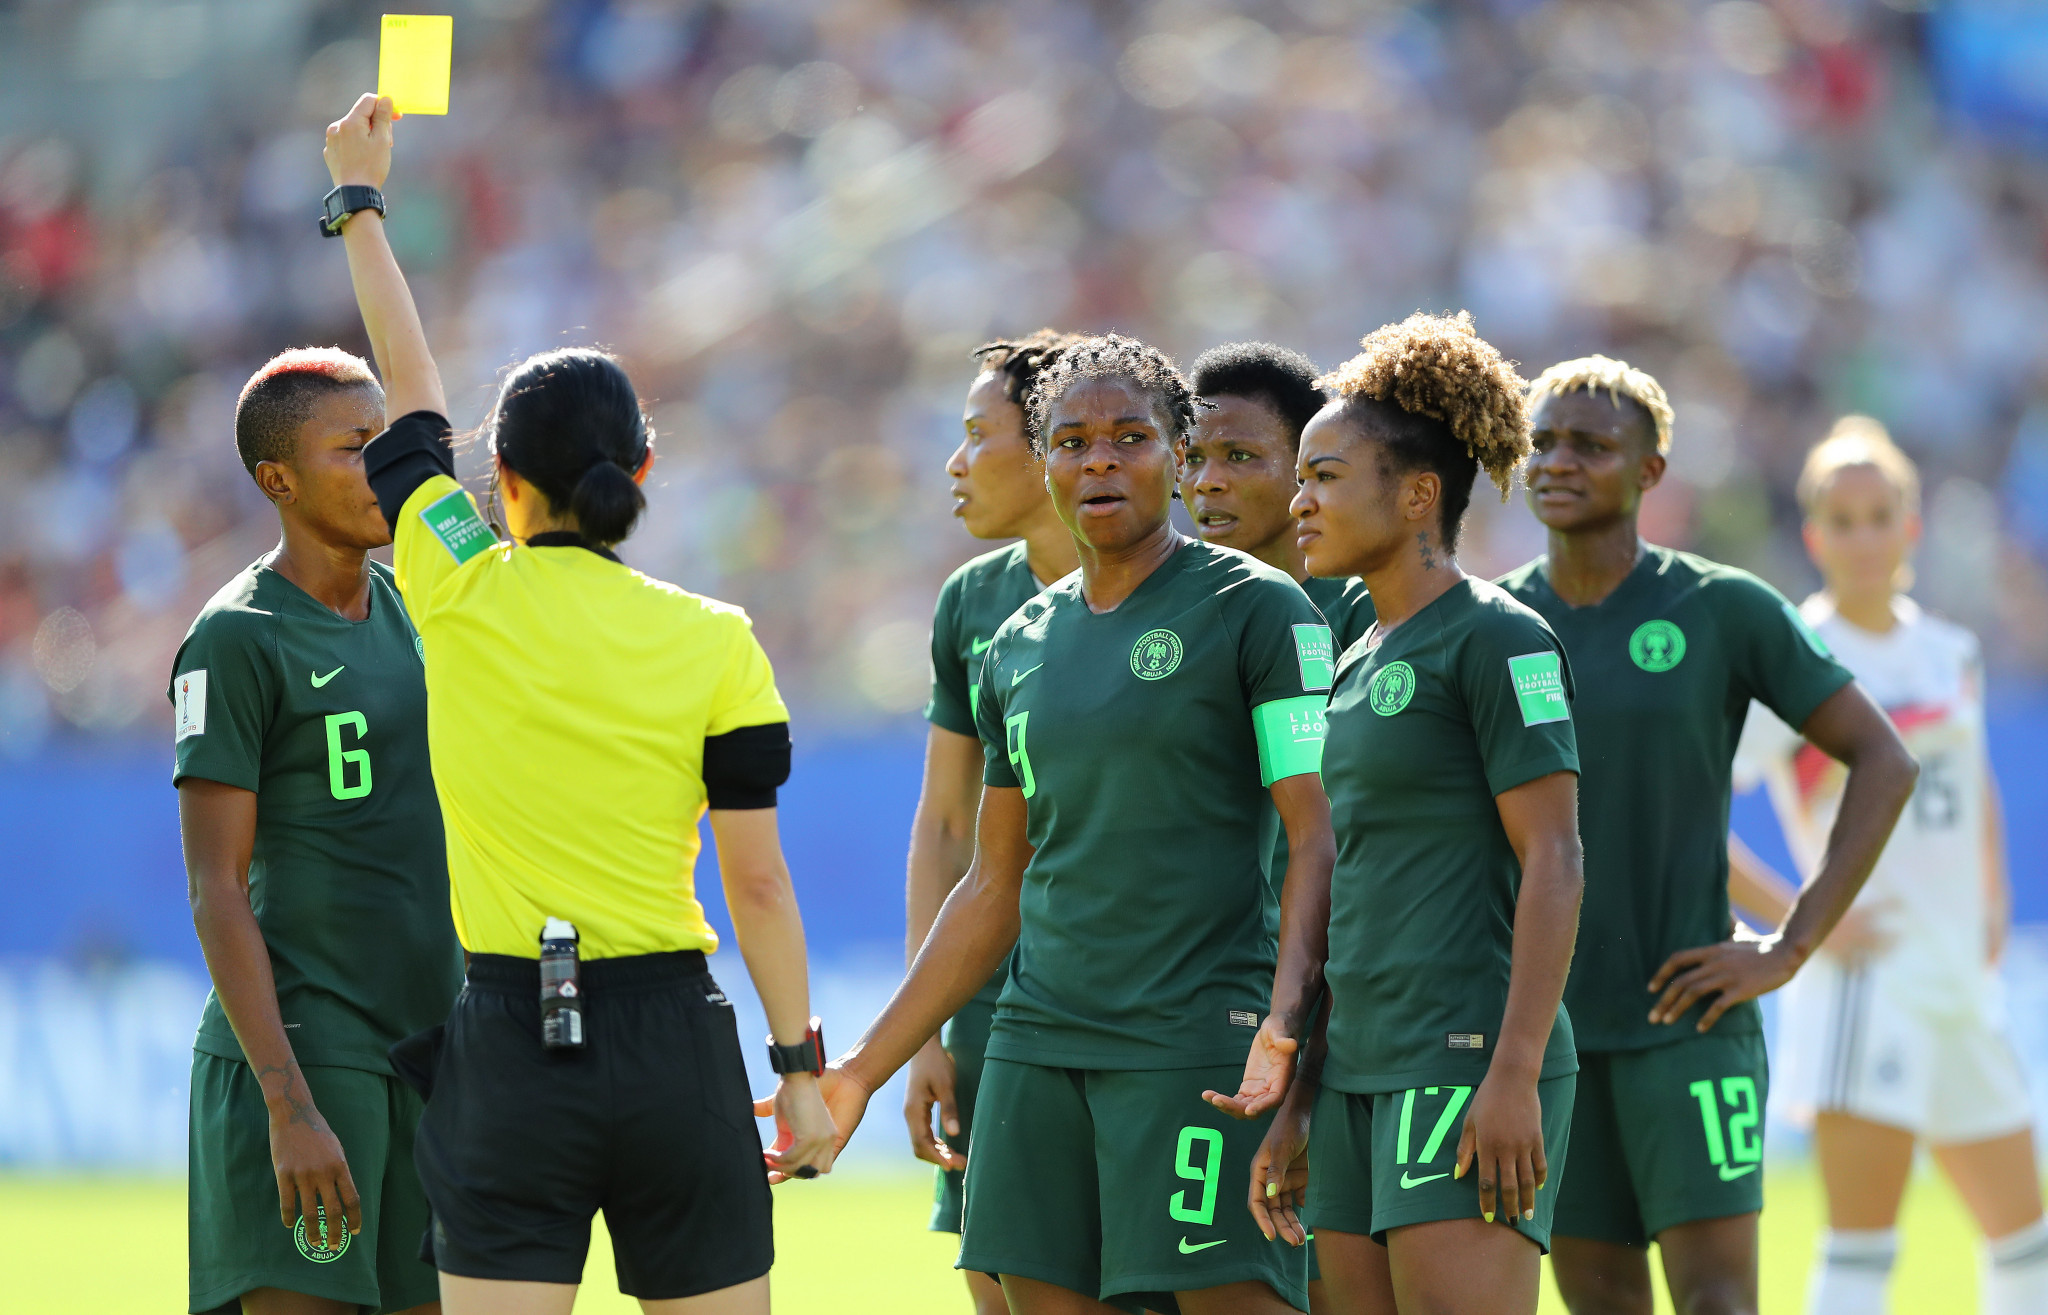 Referee Yoshimi Yamashita shows Evelyn Nwabuoku a yellow card after awarding a penalty against Nigeria via VAR ©Getty Images